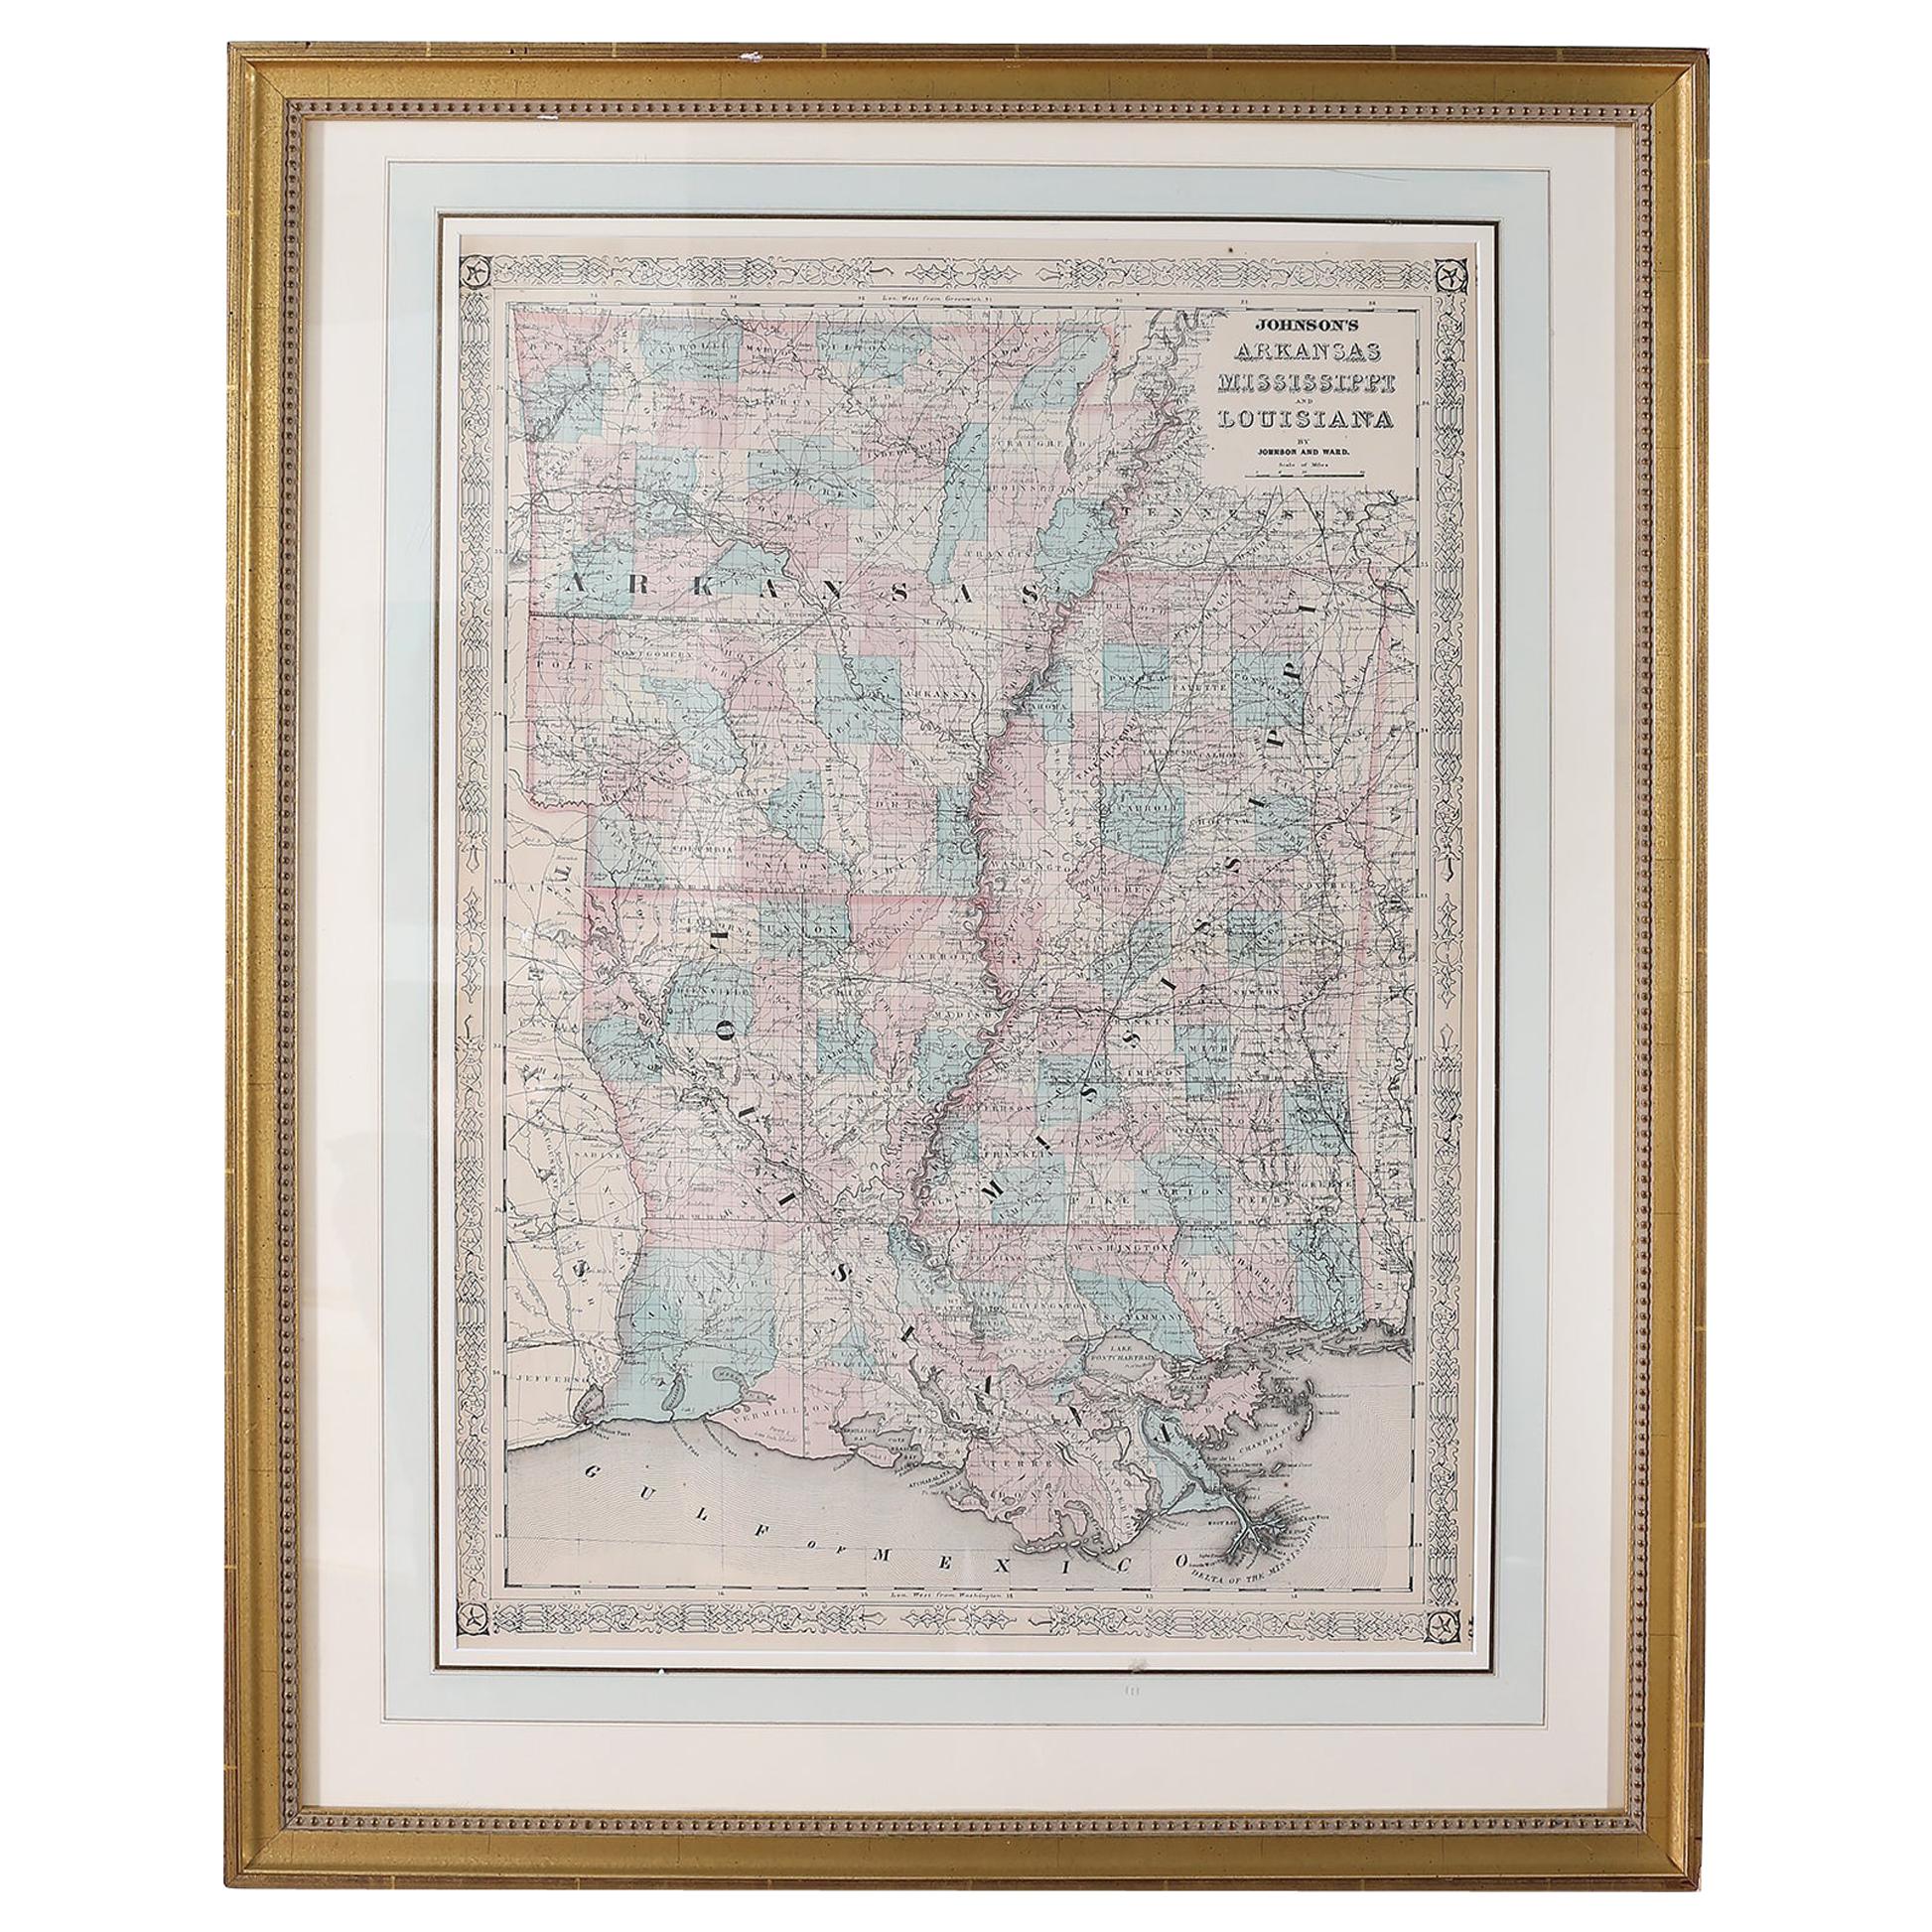 Giltwood Framed / Matted Library / Study Room Map